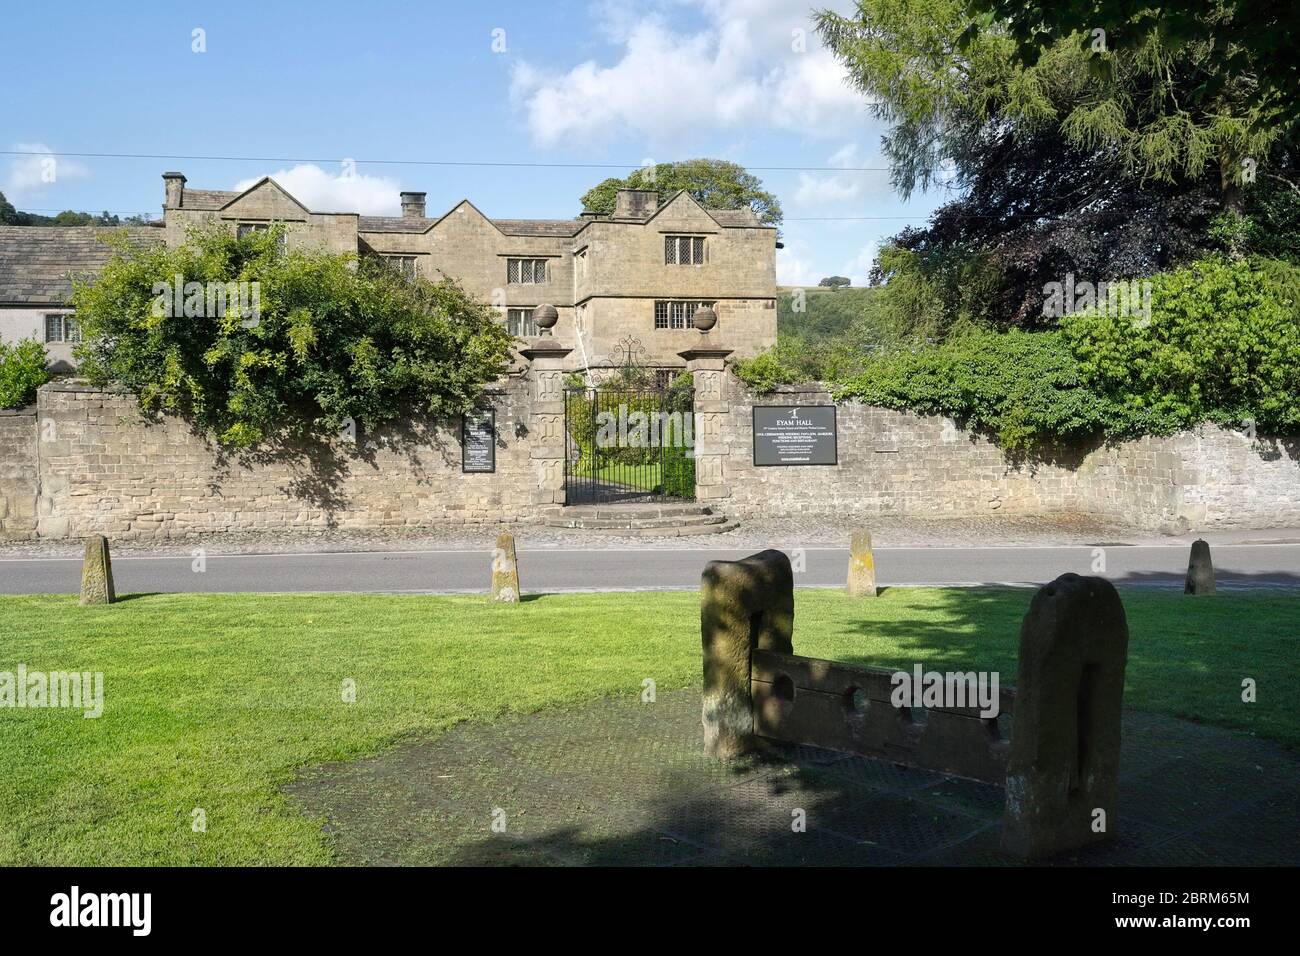 Eyam Hall in the Peak District, Derbyshire England UK, Jacobian styled historic, grade 2 listed building. Village stocks in foreground. Stock Photo